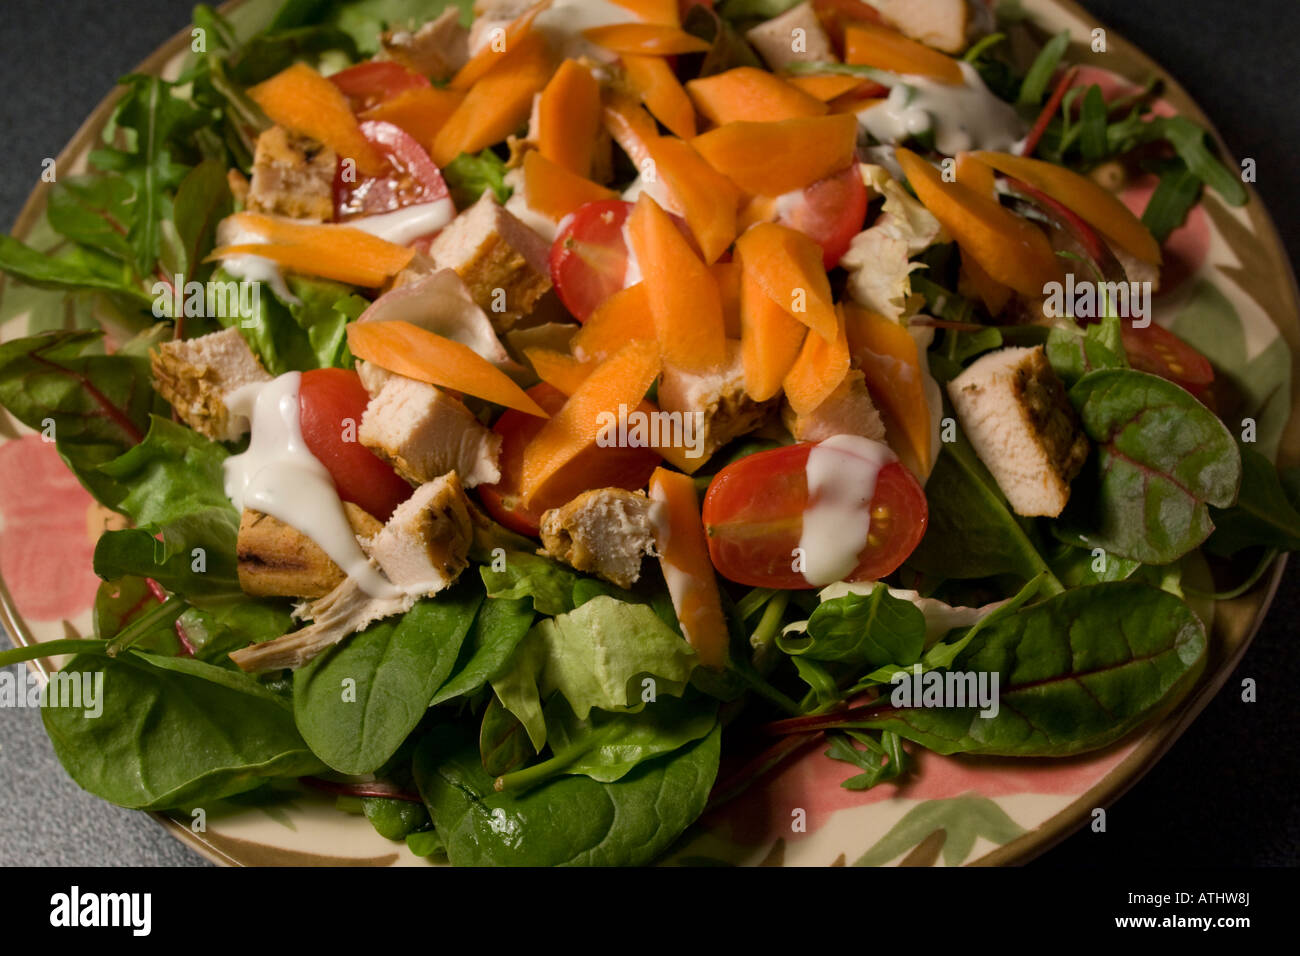 Home made Chefs salad  baby plum tomato chicken baby leaf salad carrot buttermilk dressing healthy sslimming 5 a day five a  day Stock Photo